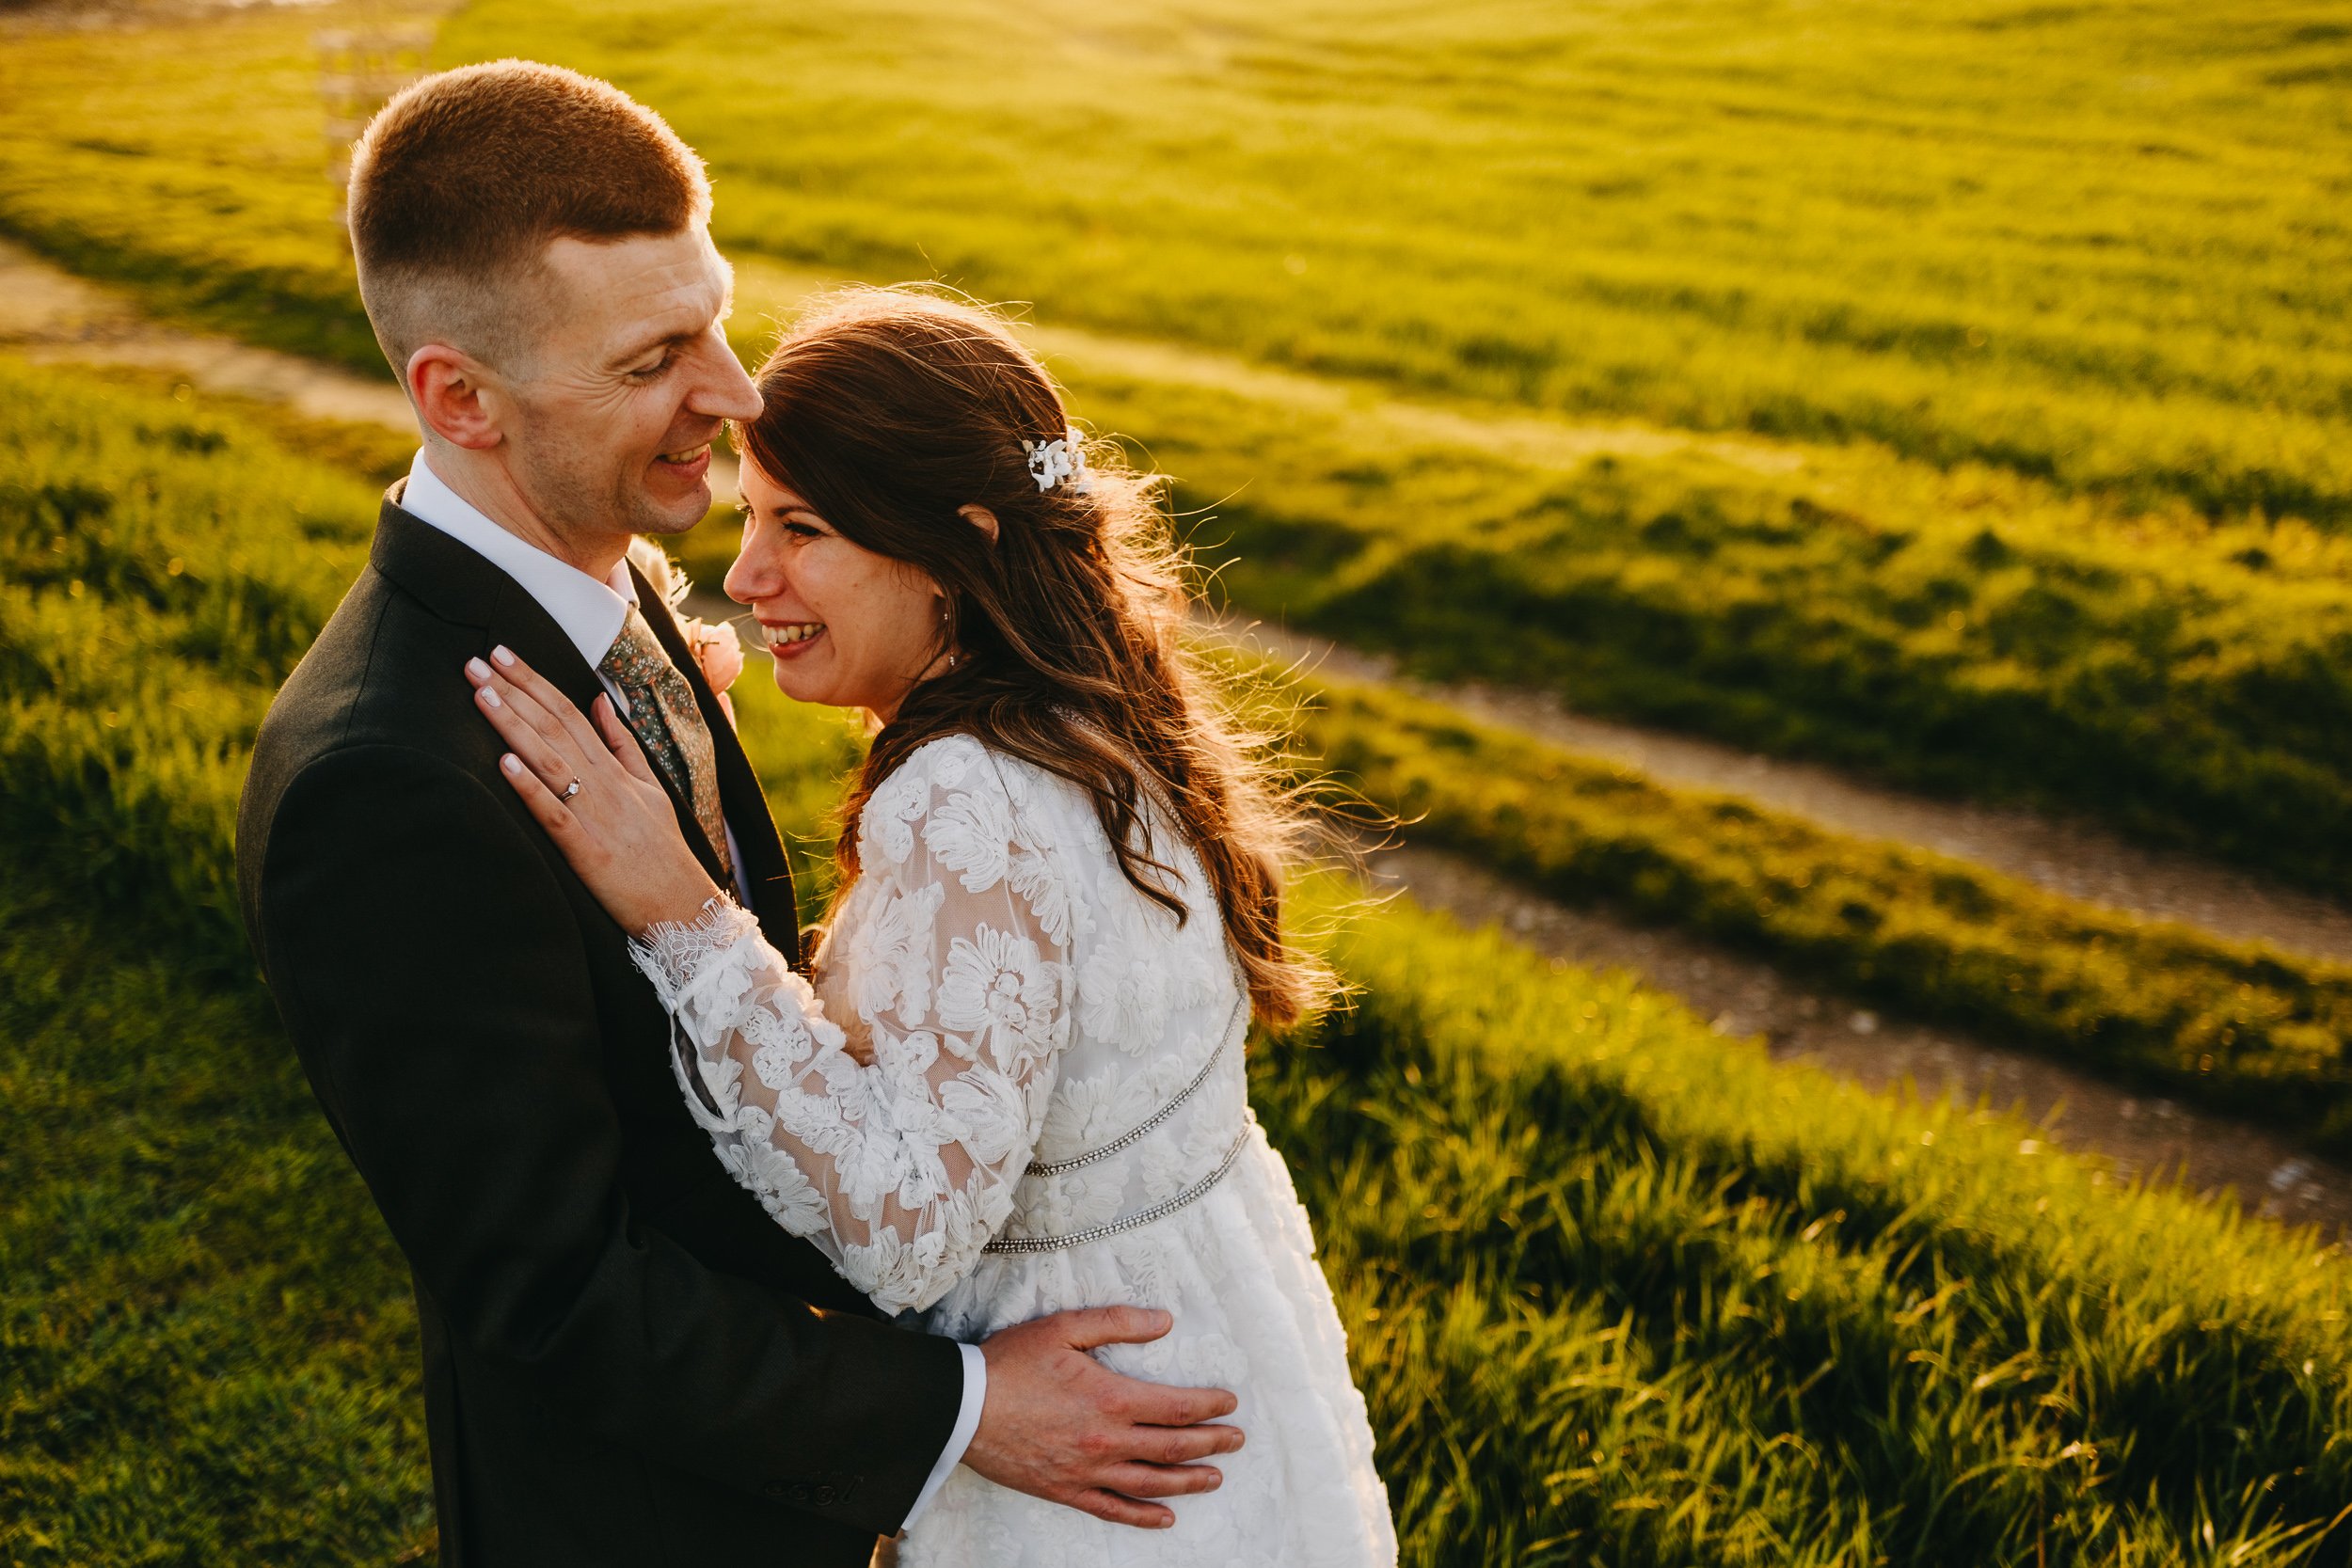 creative sunset wedding portrait at Thirsk Lodge Barns by Martyn Hand